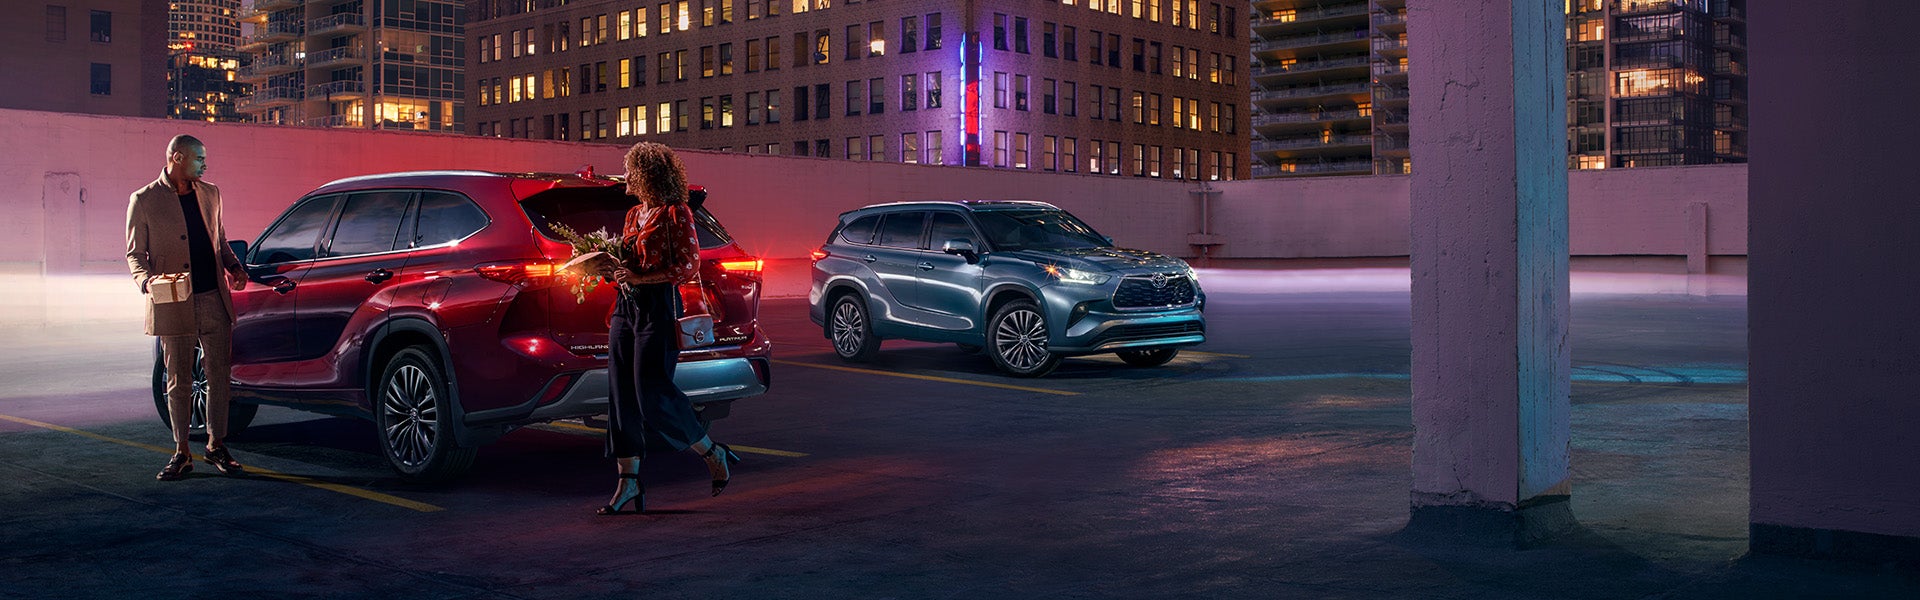 Model Features of the 2022 Toyota Highlander Hybrid at Bennett Toyota | Blue and Red Highlander Hybrid Vehicles Parked Next to Each Other on Top Floor of City Parking Garage at Night